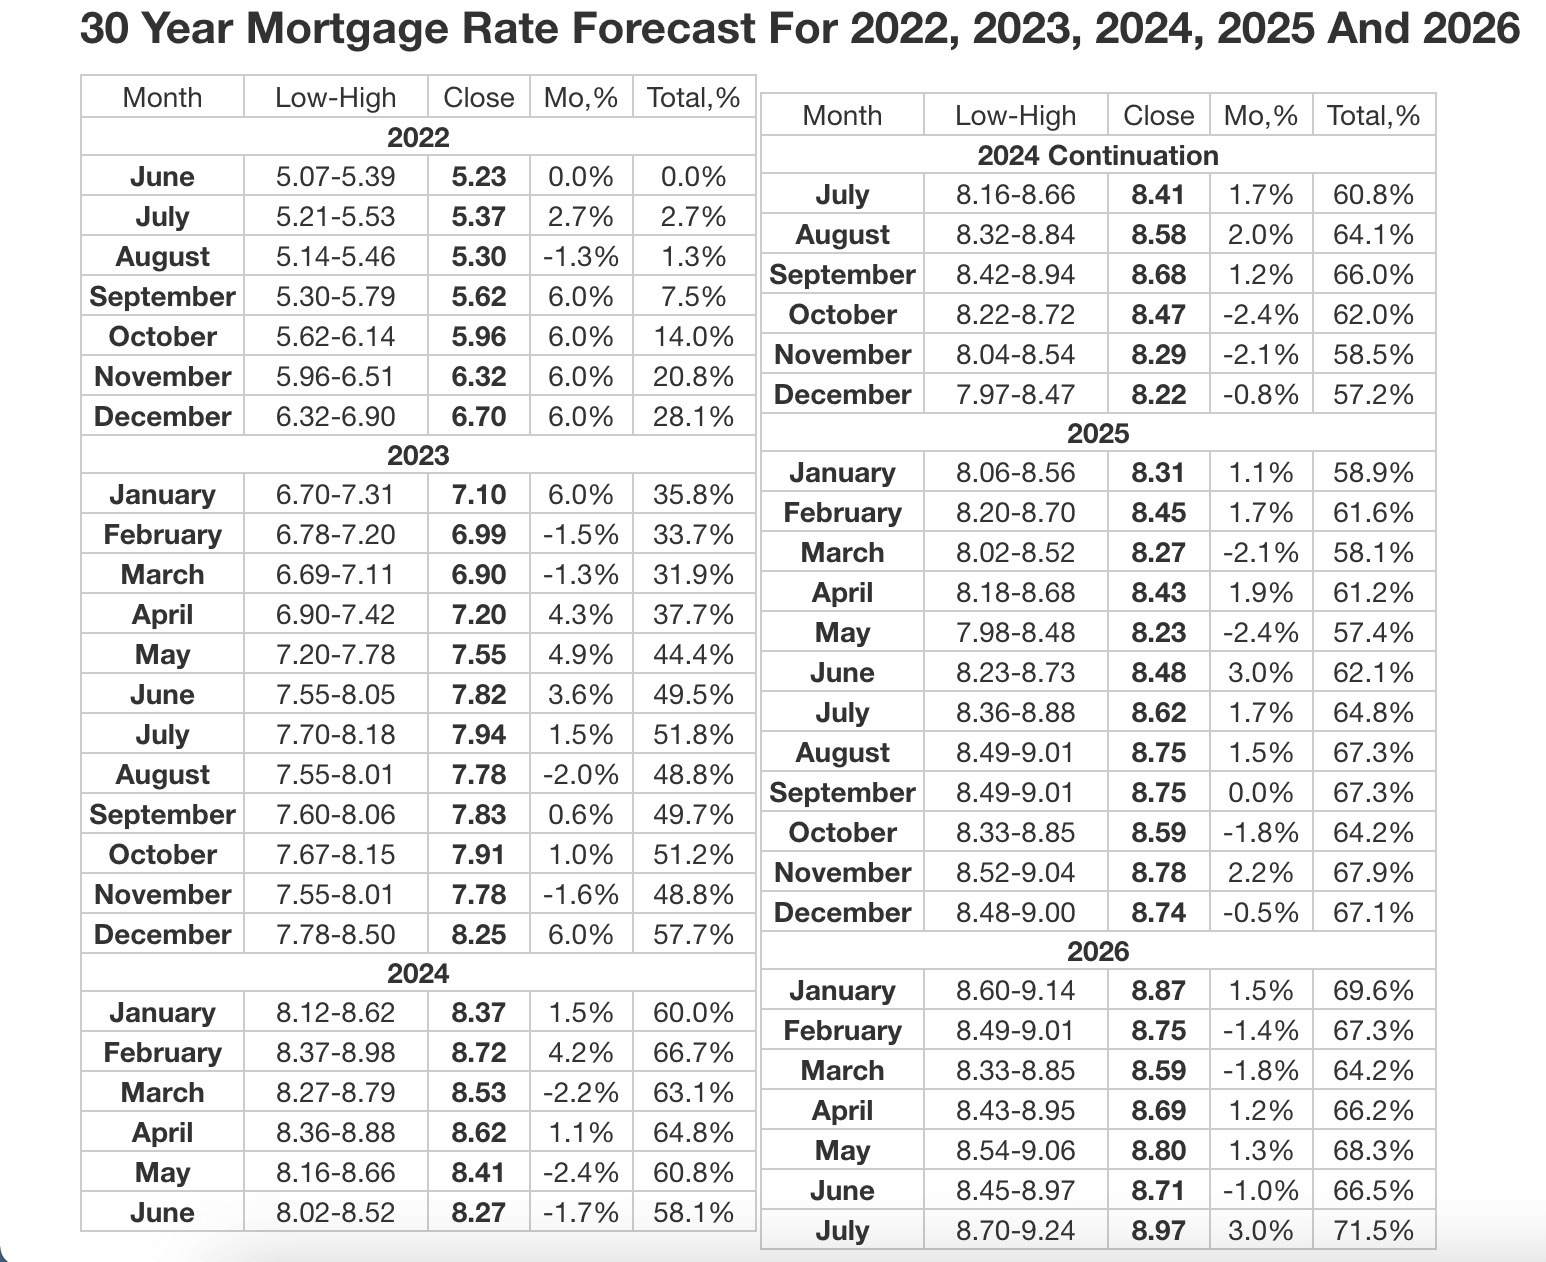 30 Year Mortgage Rate Forecast For 2022, 2023, 2024, 2025 And 2026